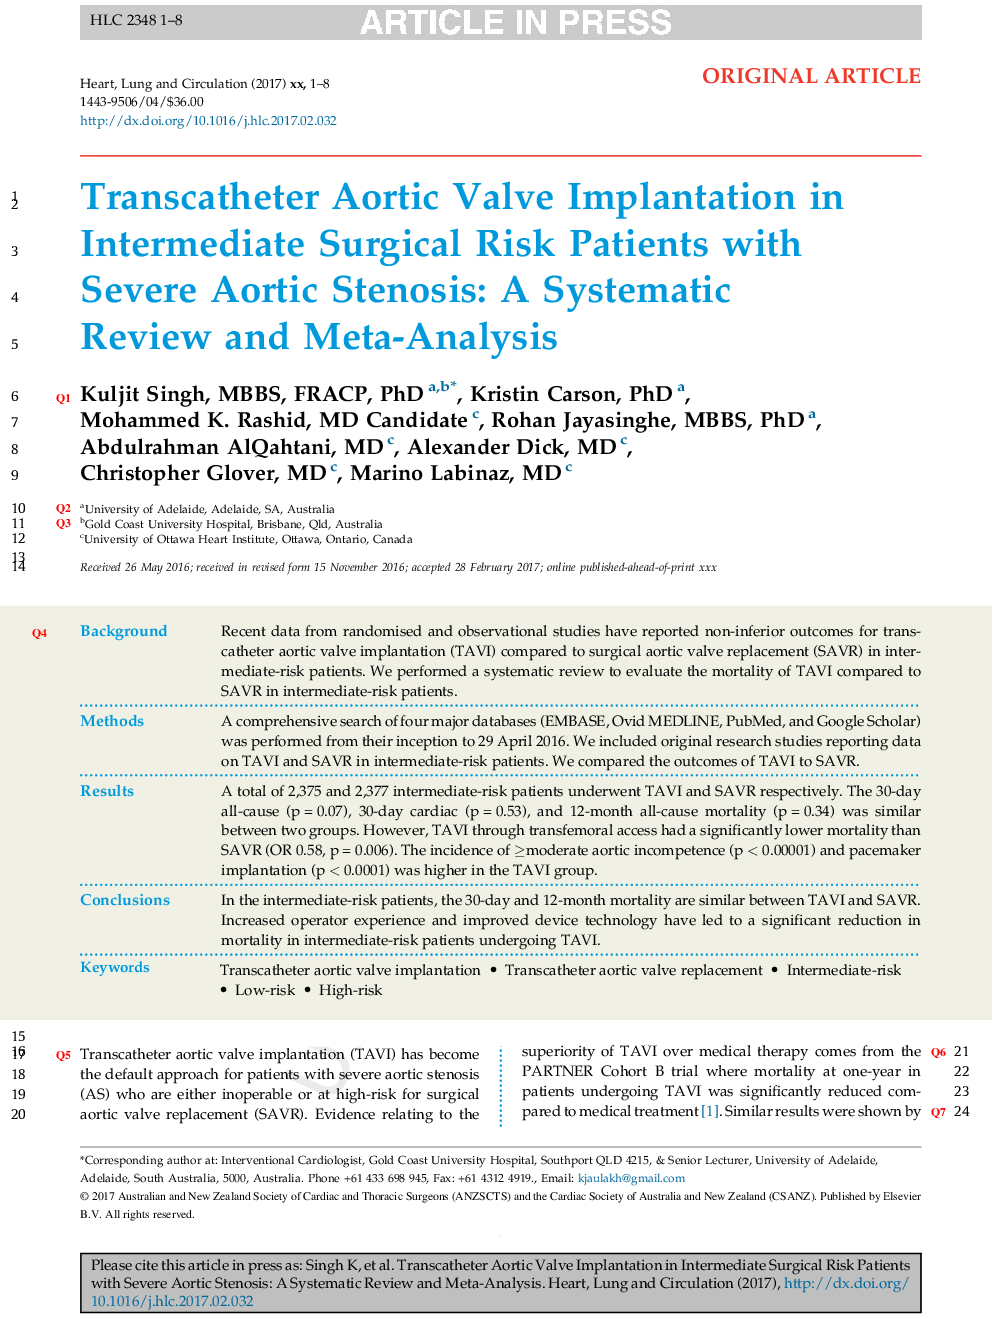 Transcatheter Aortic Valve Implantation in Intermediate Surgical Risk Patients With Severe Aortic Stenosis: A Systematic Review and Meta-Analysis